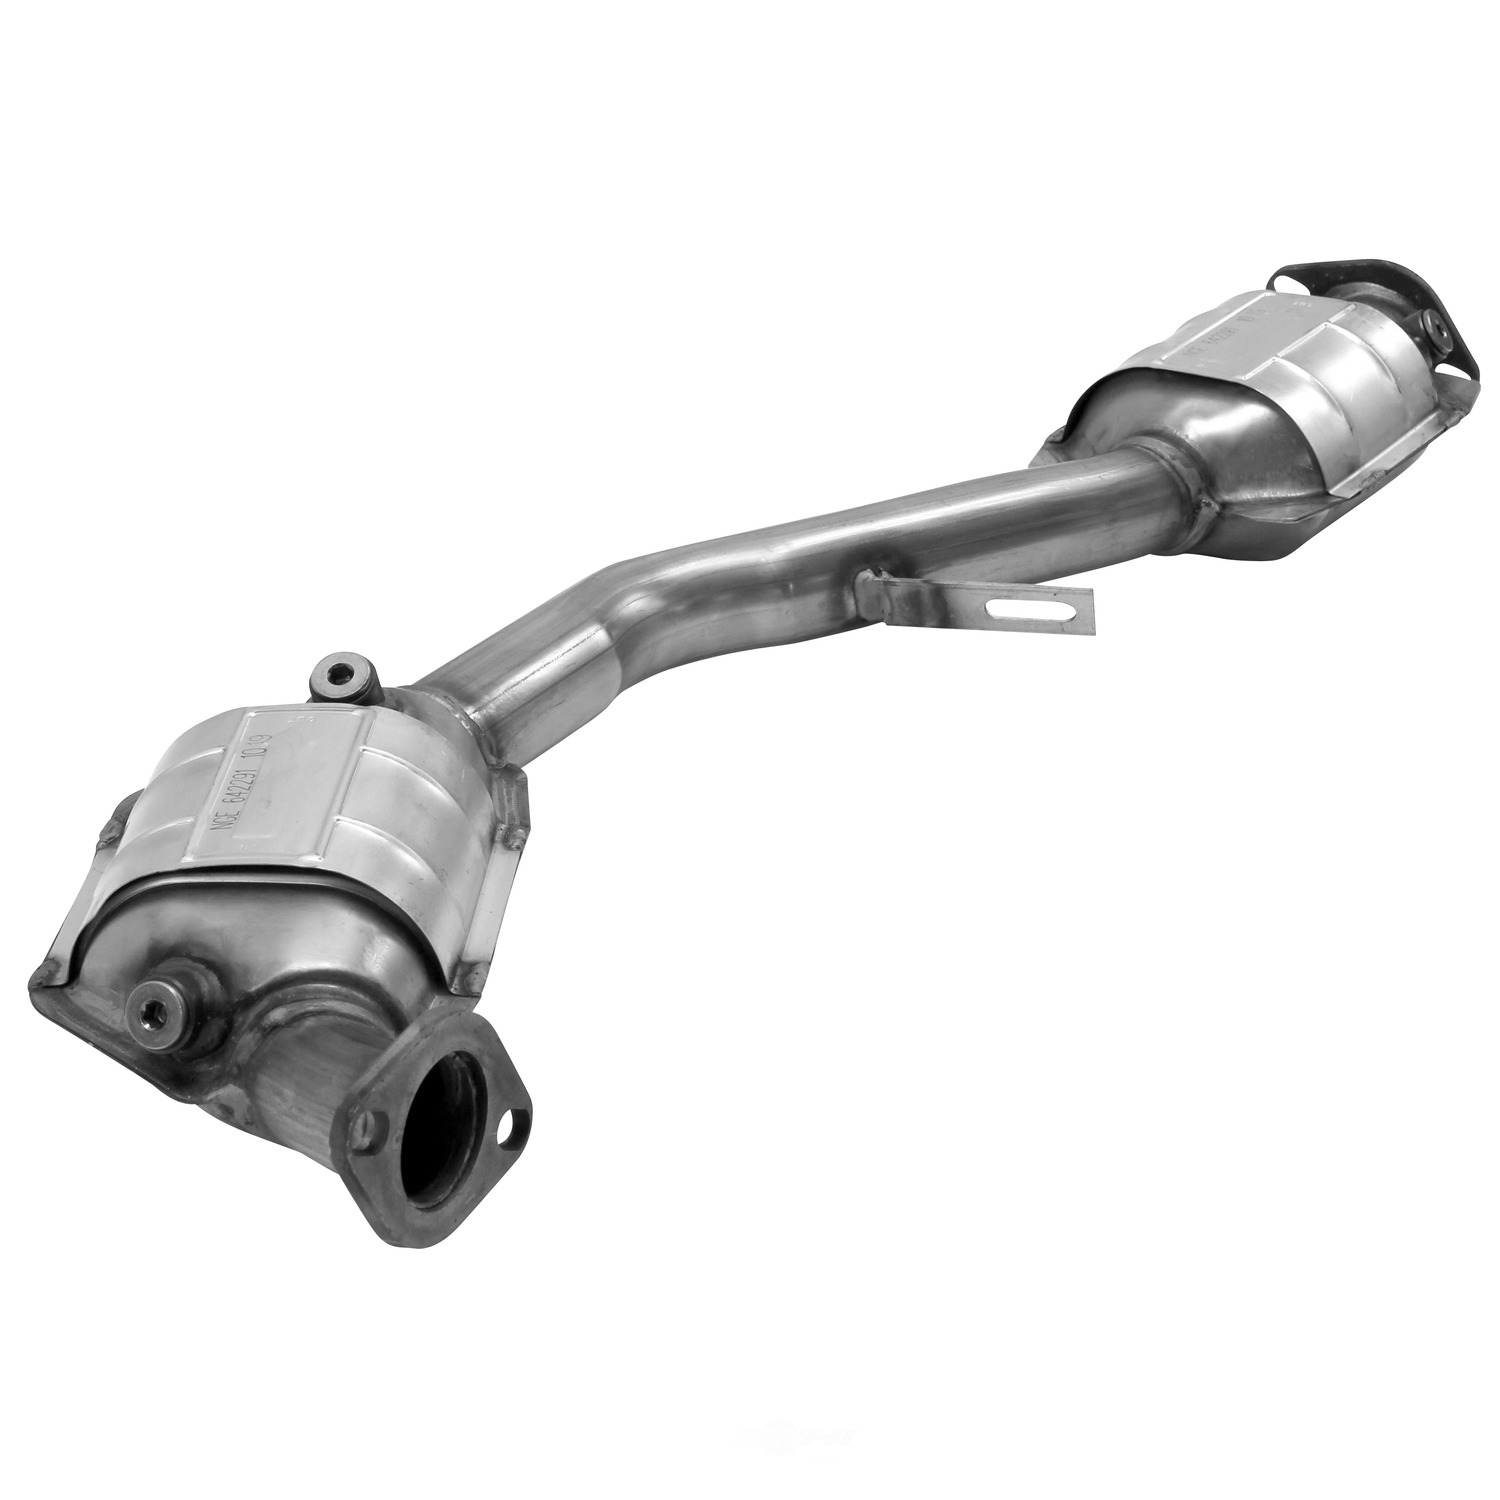 AP EXHAUST FEDERAL CONVERTER - Direct Fit Converter - APG 642291